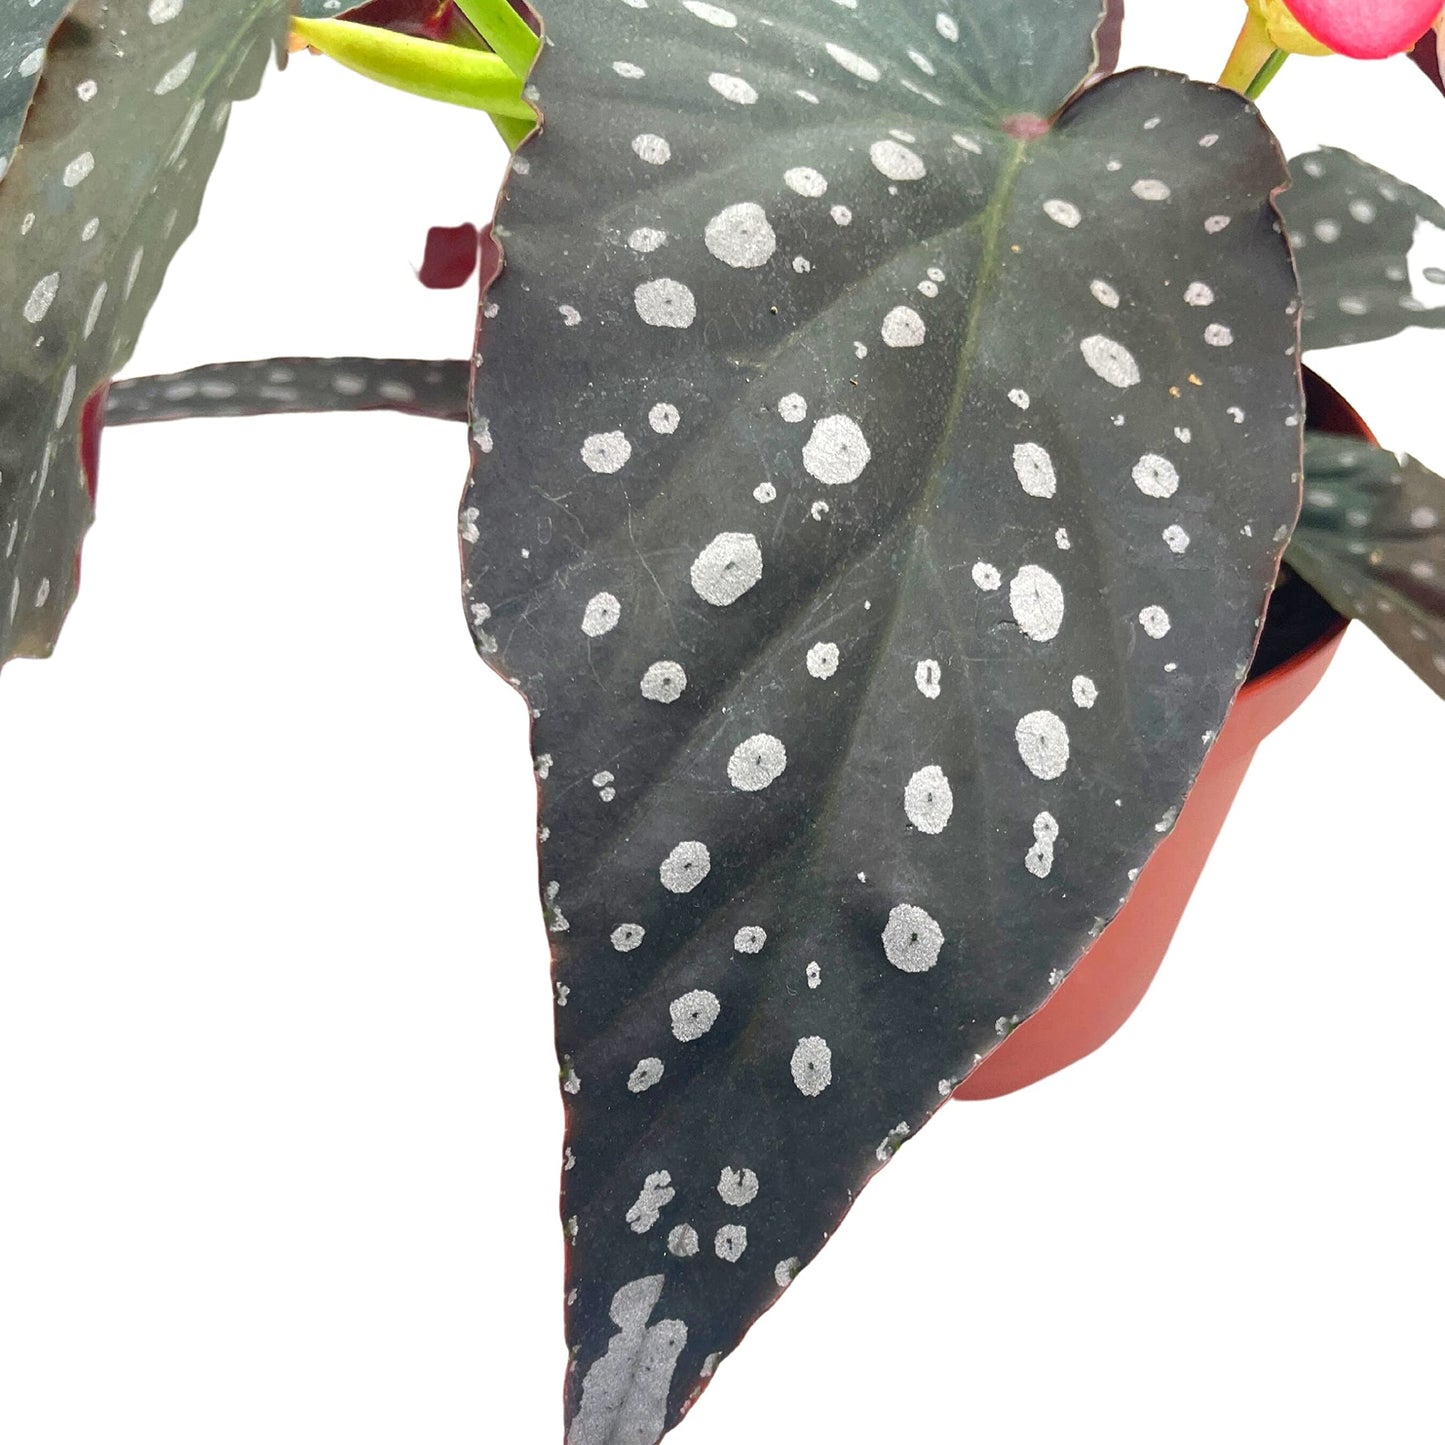 Harmony's Serenity, Exclusive Hybrid, Angel Wings Polka dot Begonia Rex, 6 inch, Very Rare Homegrown Unique Variegated Begonia